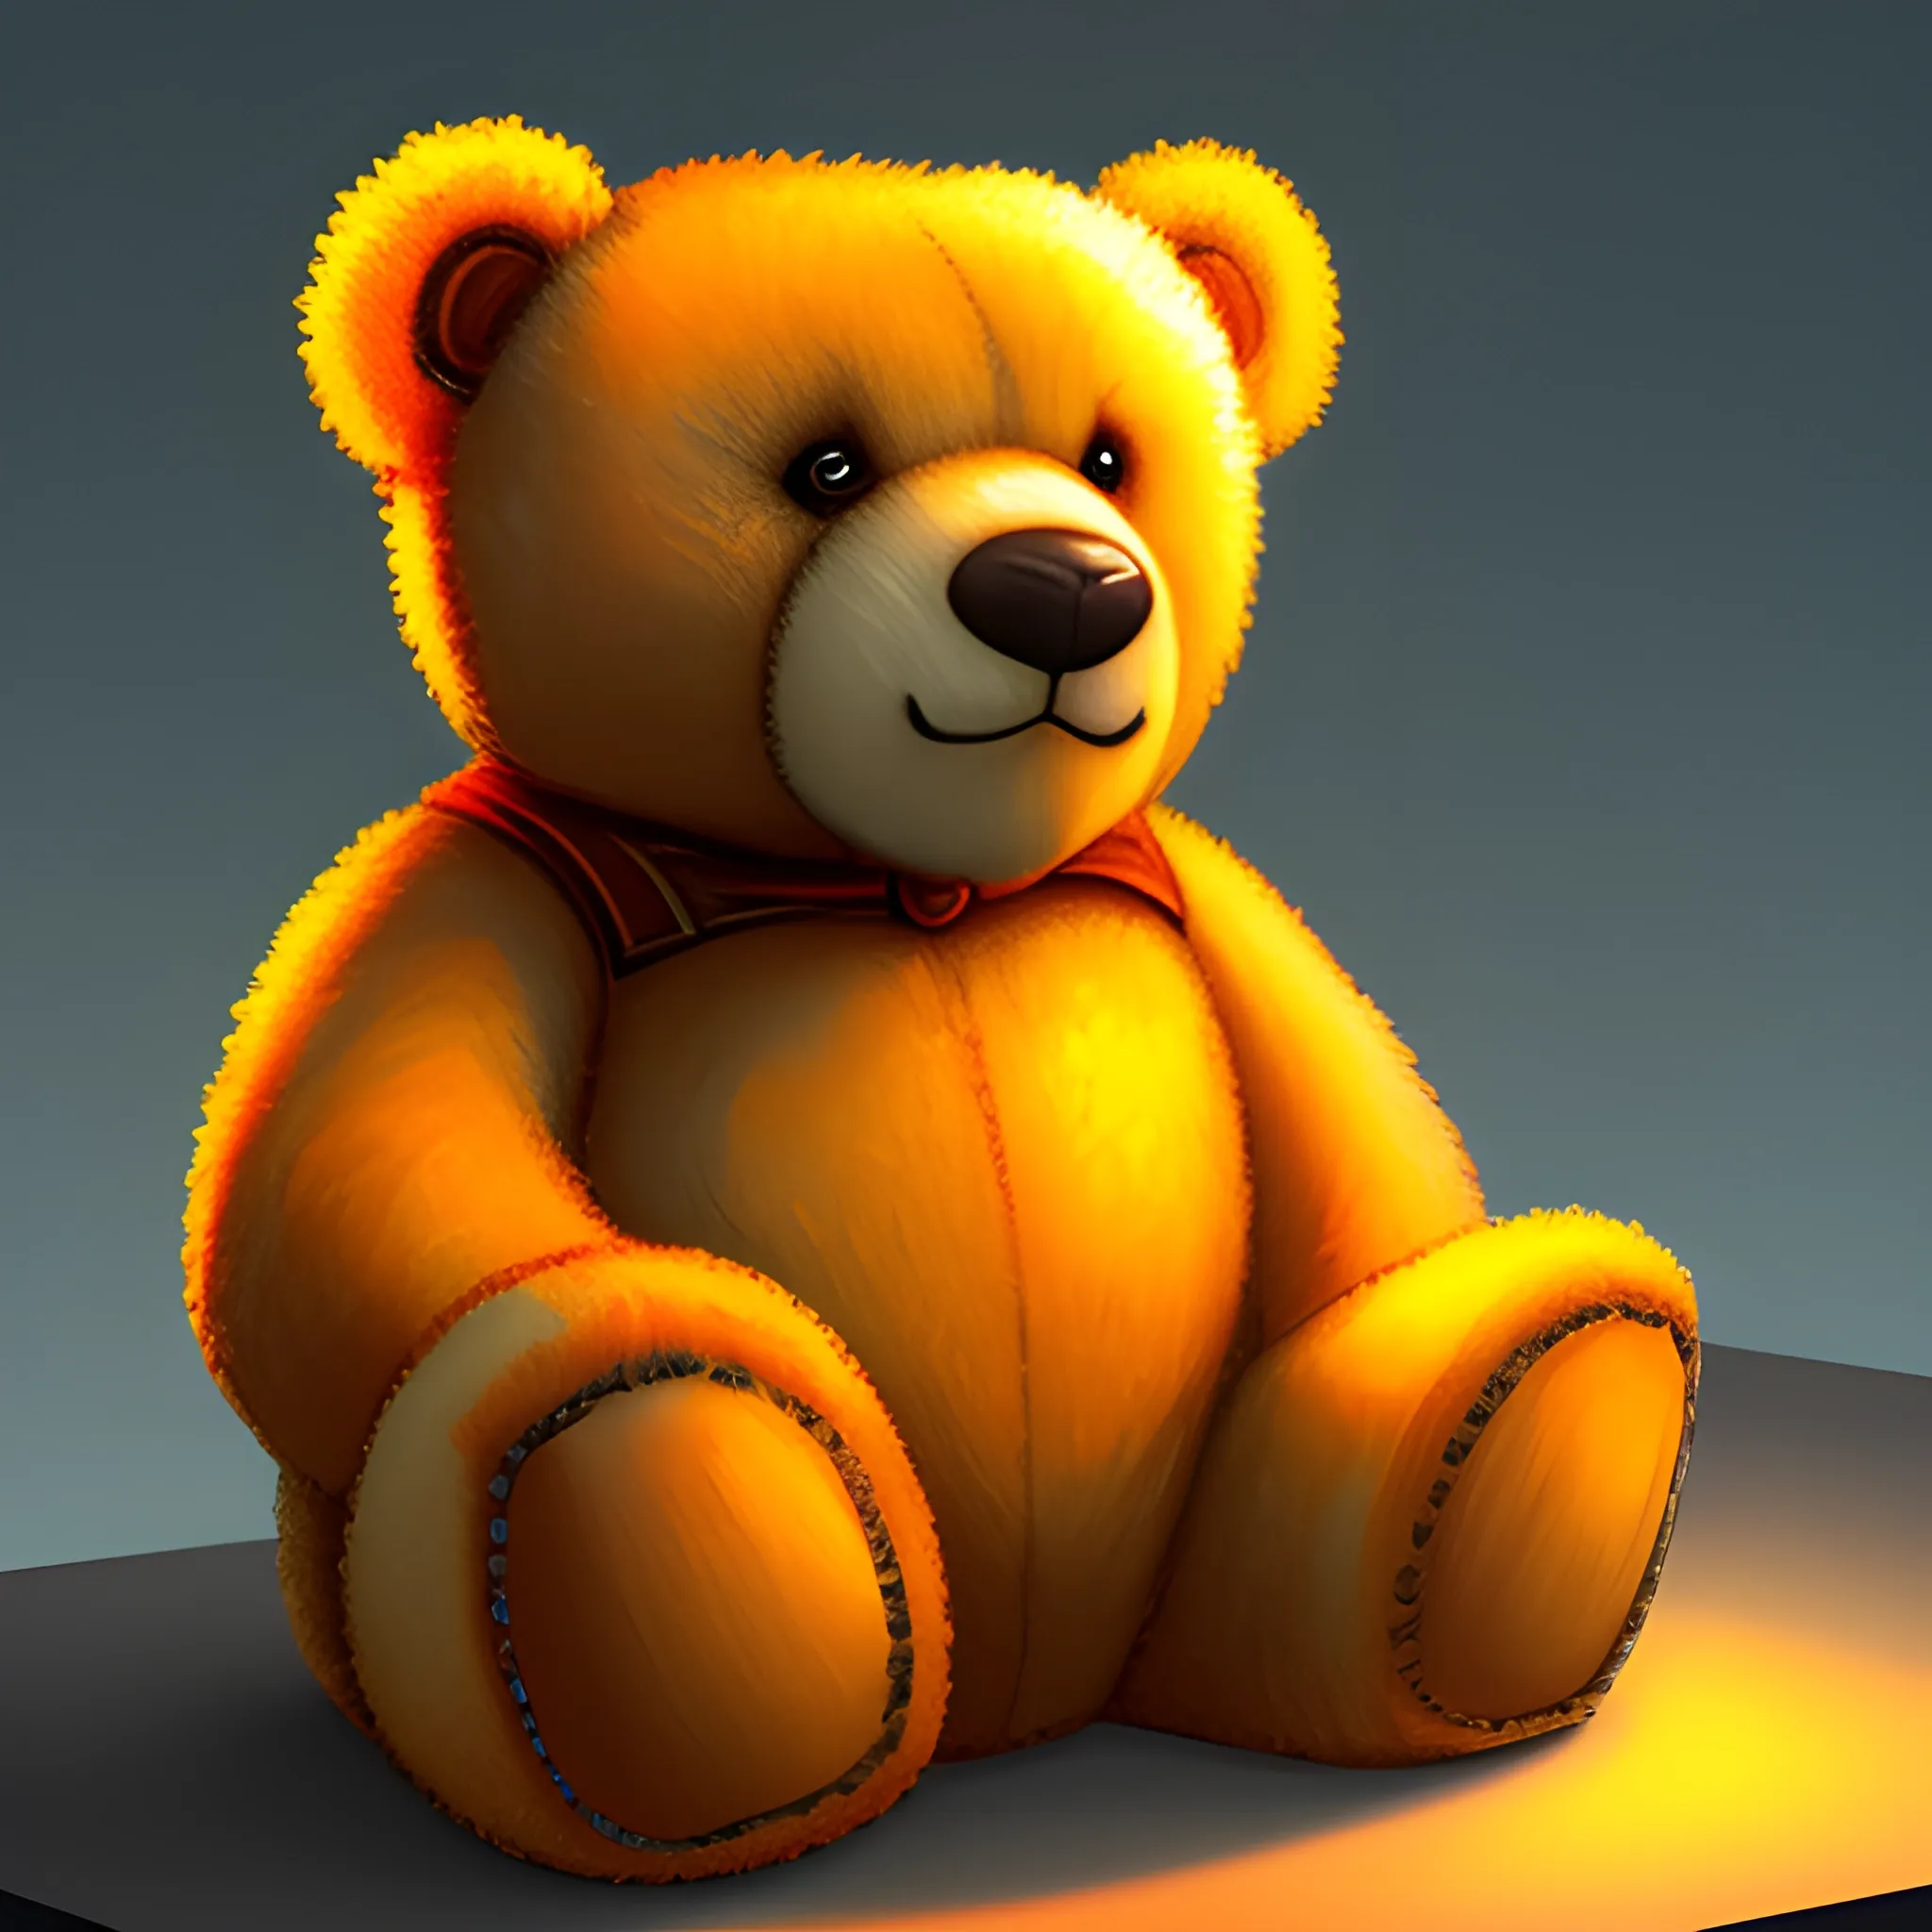 illustration of small teddy bear sitting looking to the side, side light illuminated face and front view, digital painting style with warm colors.